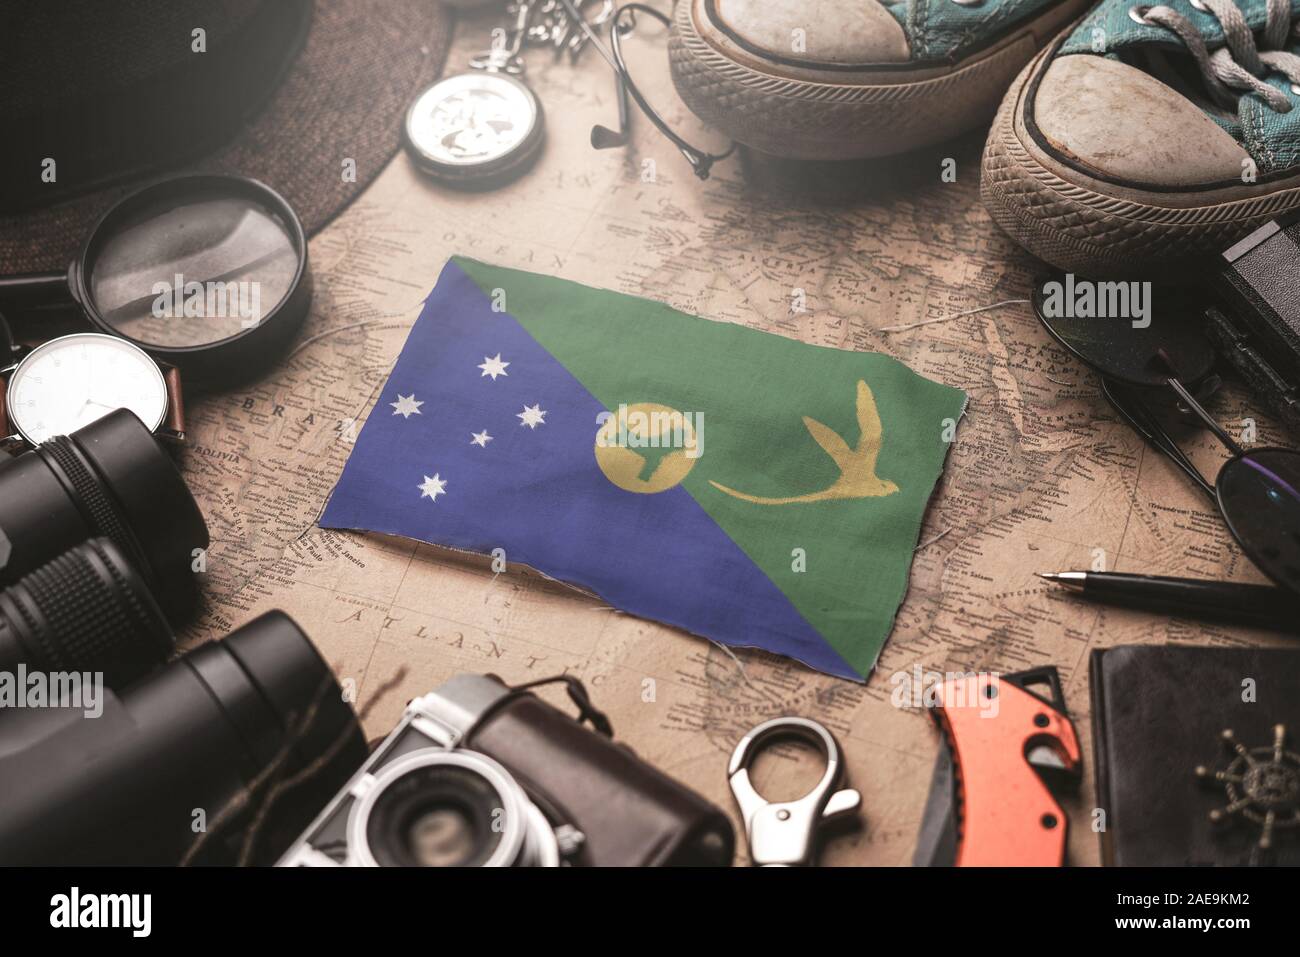 Christmas Island Flag Between Traveler's Accessories on Old Vintage Map. Tourist Destination Concept. Stock Photo